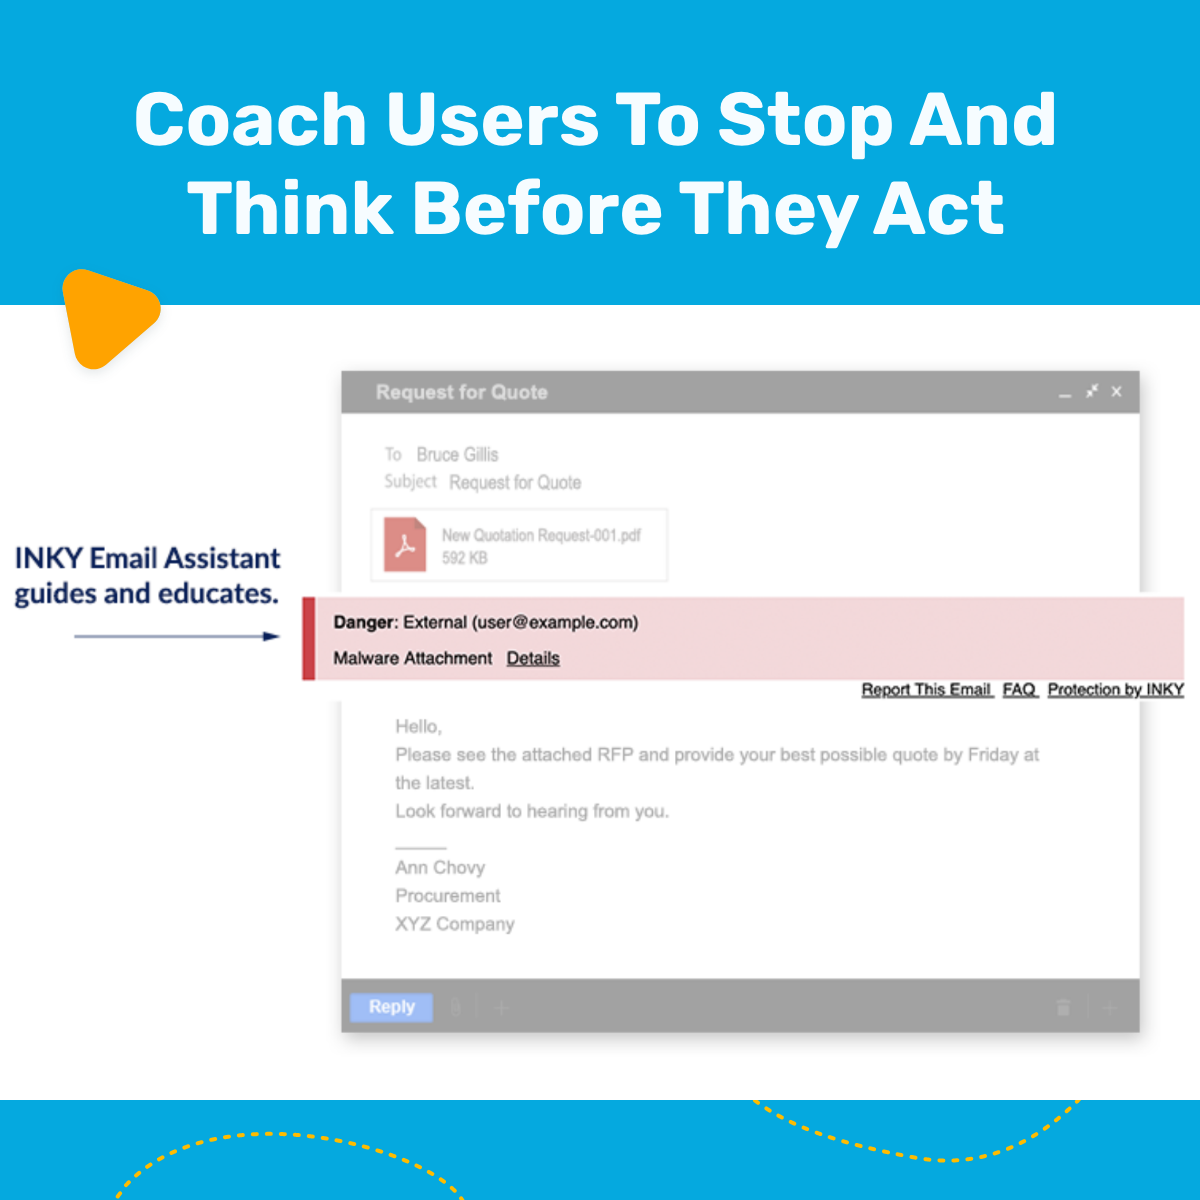 Coach users to stop and think before they act